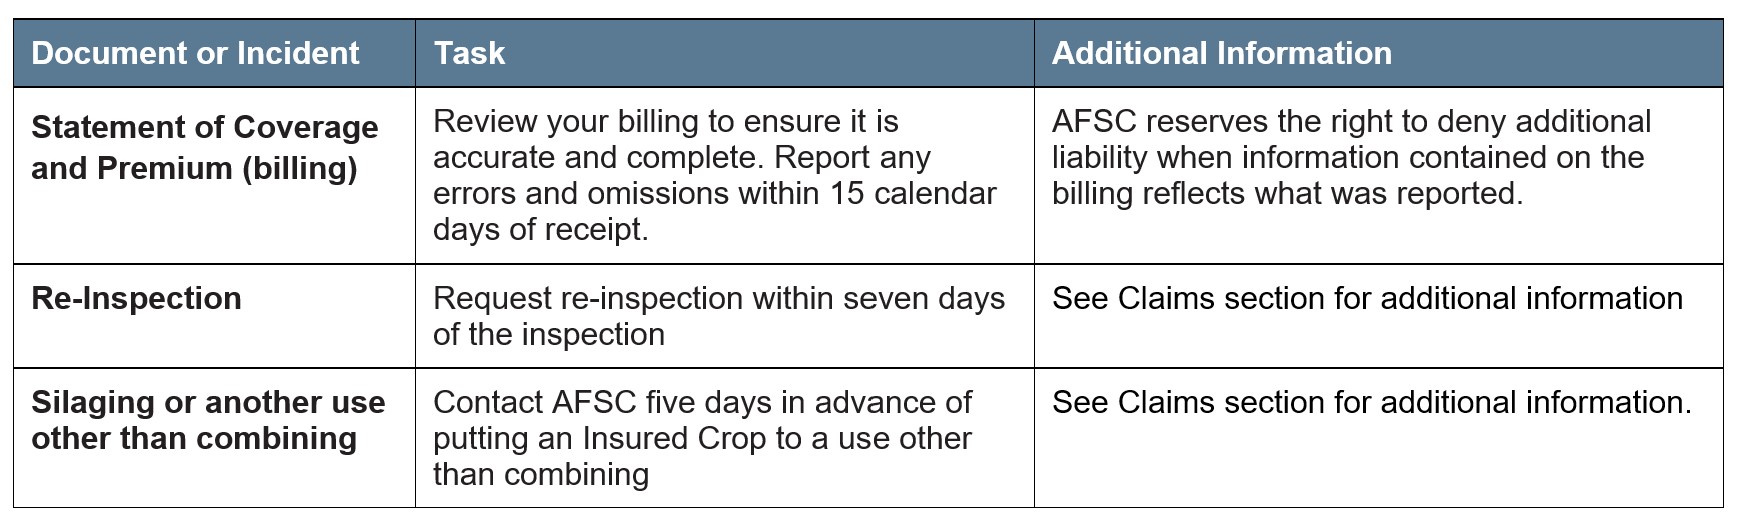 Creeping Red Fescue Article 4 Other Deadlines. Call AFSC for details